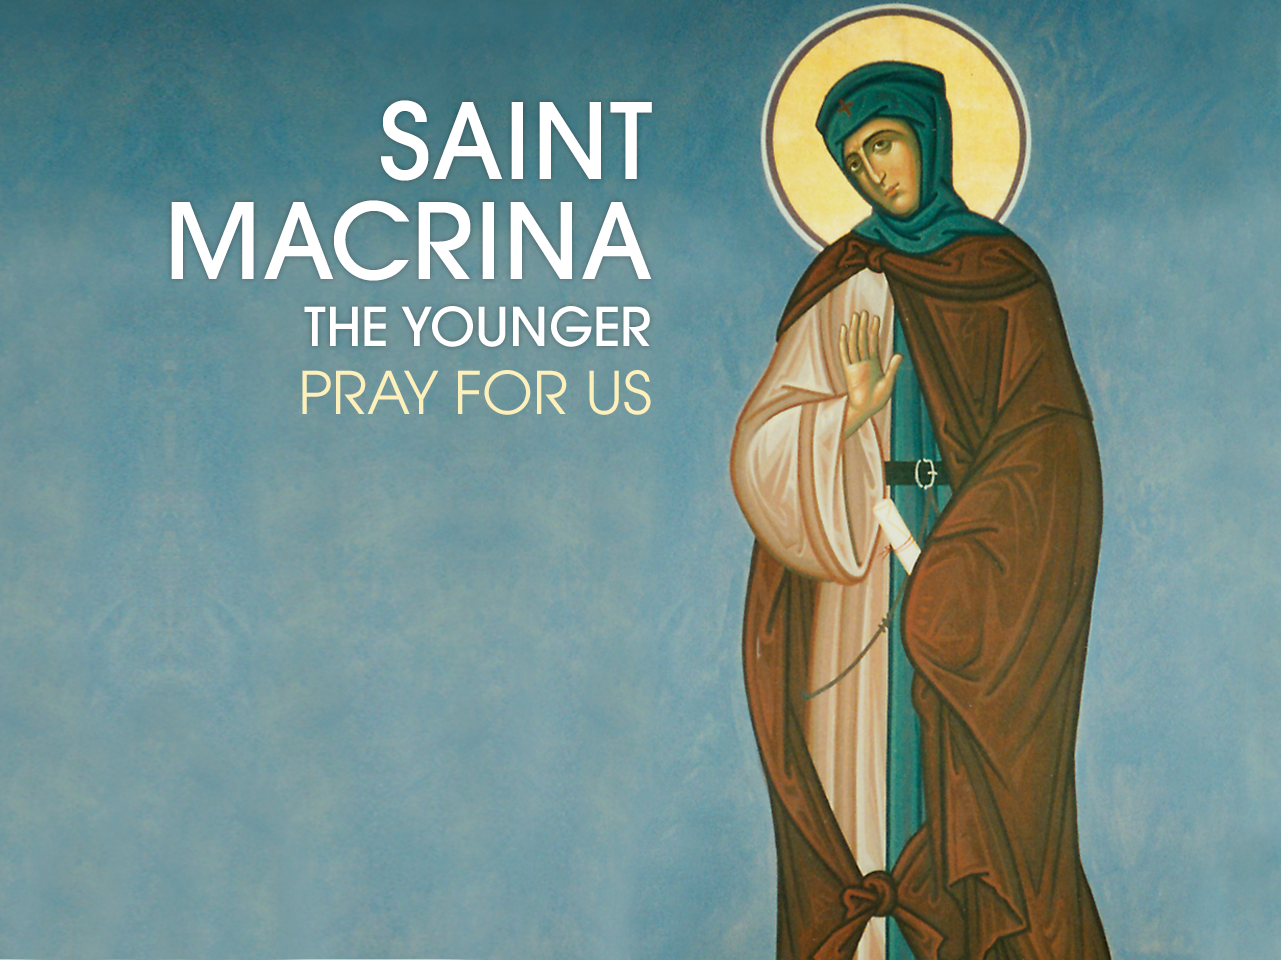 St. Macrina the Younger